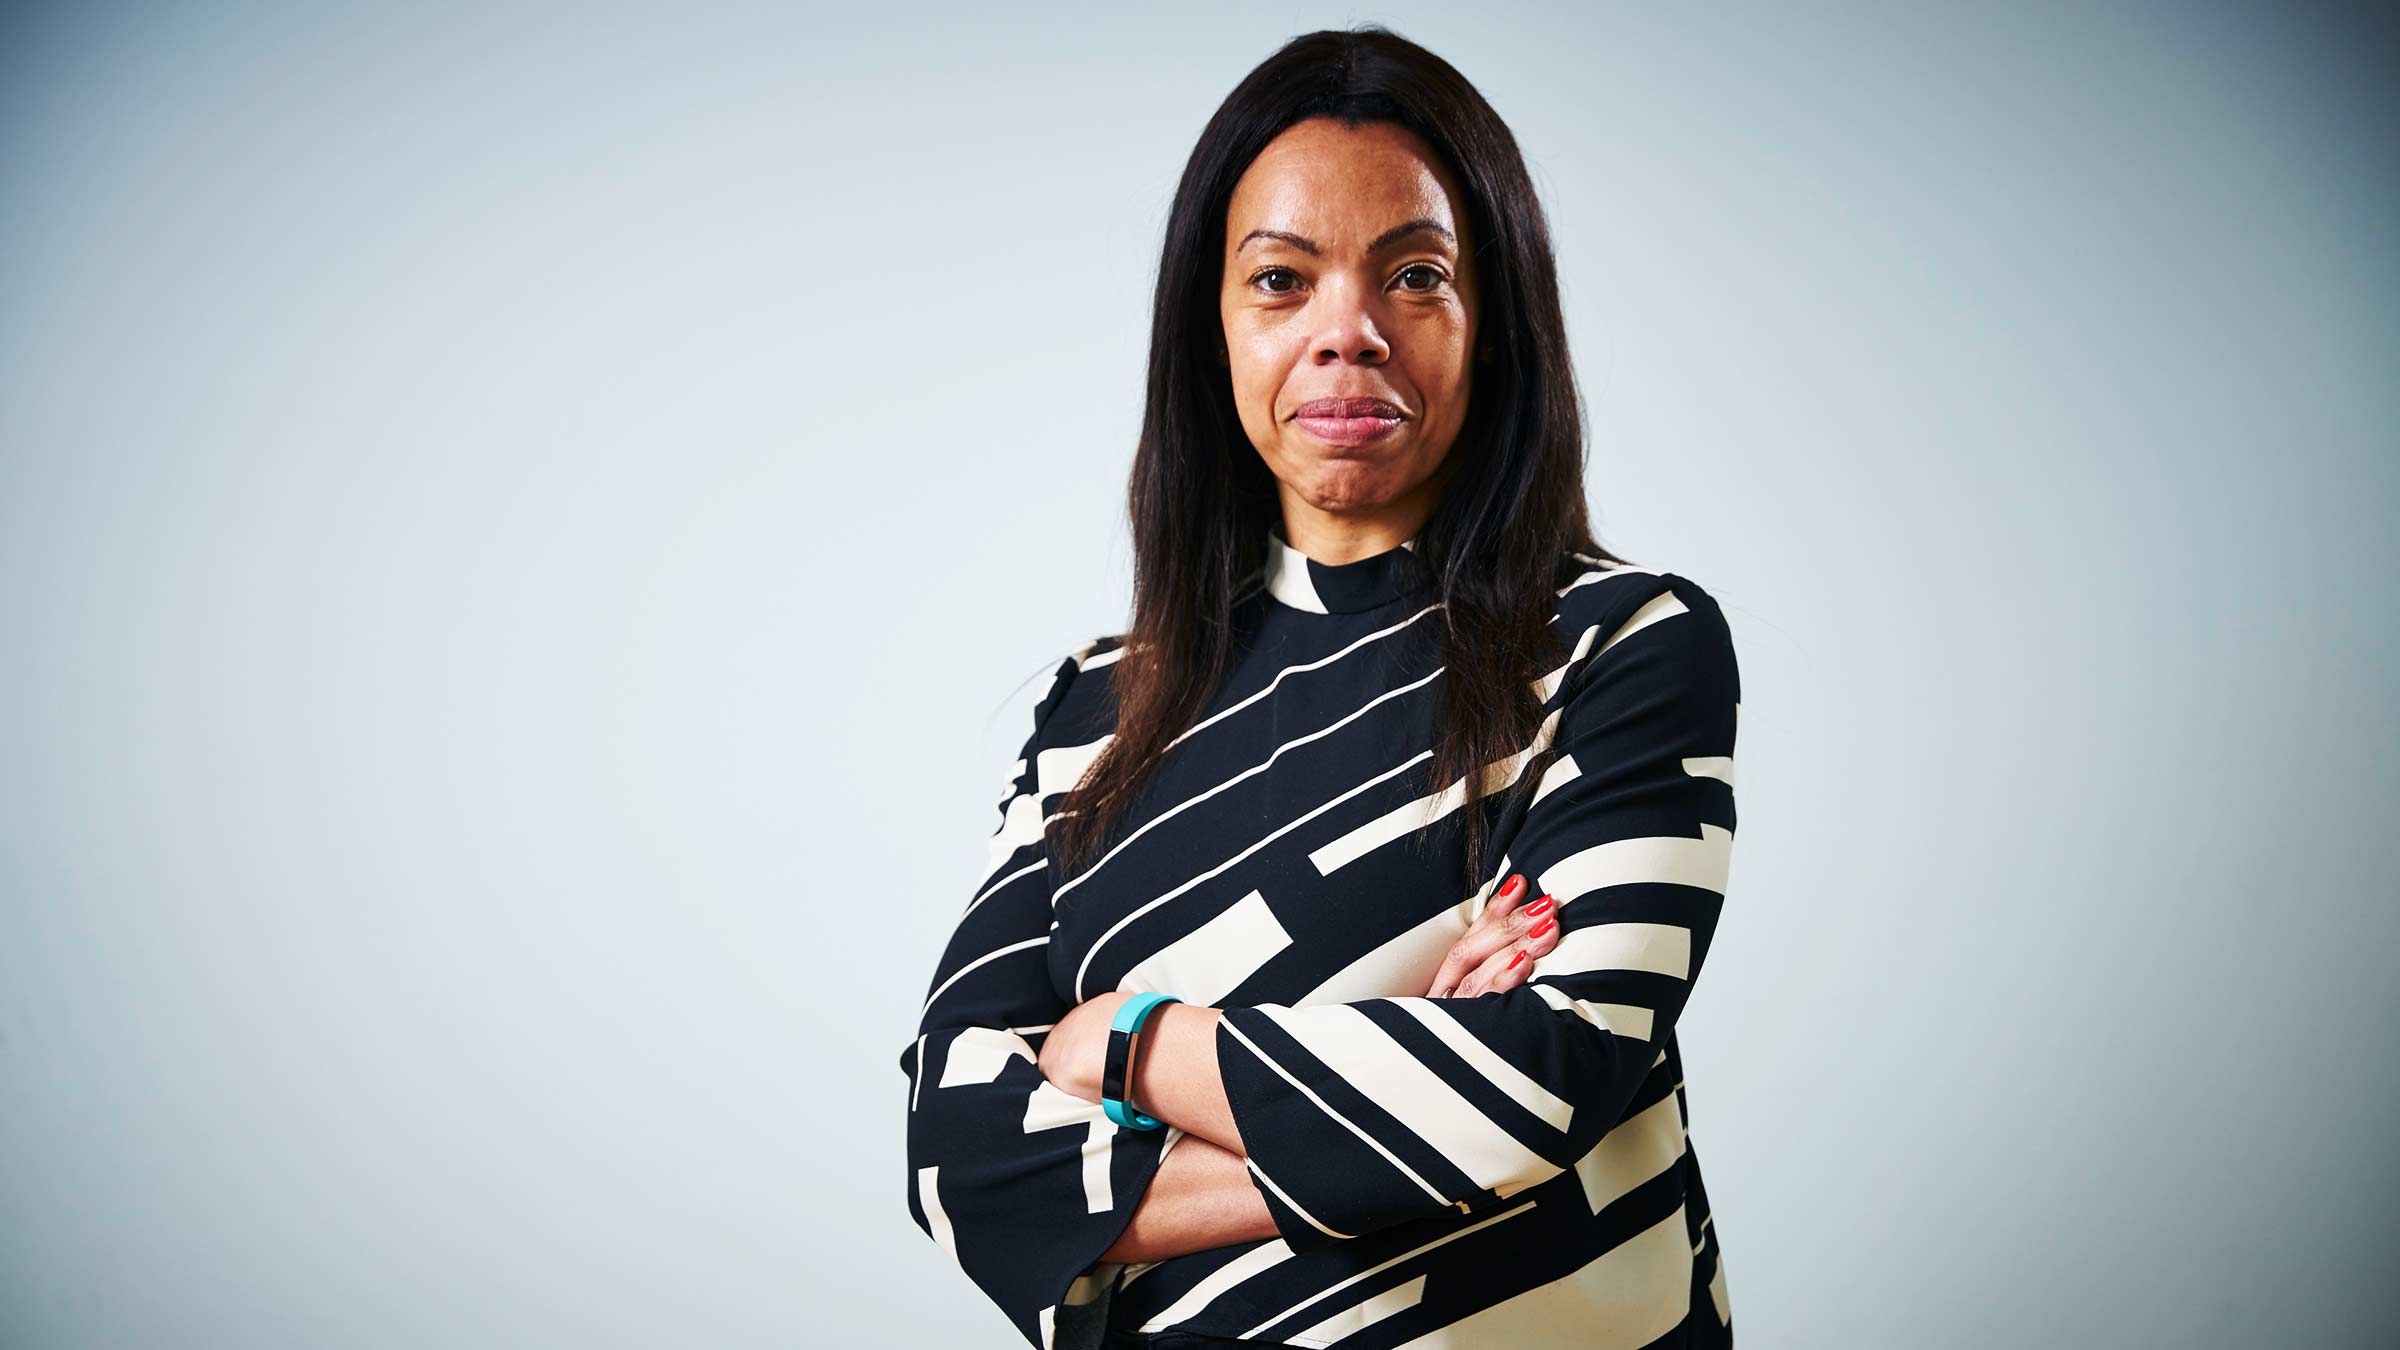 Tech Q&A: Channel 4 Chief Human Resources Officer Caroline Ross on driving culture, diversity and “Born Risky” through technology and innovation